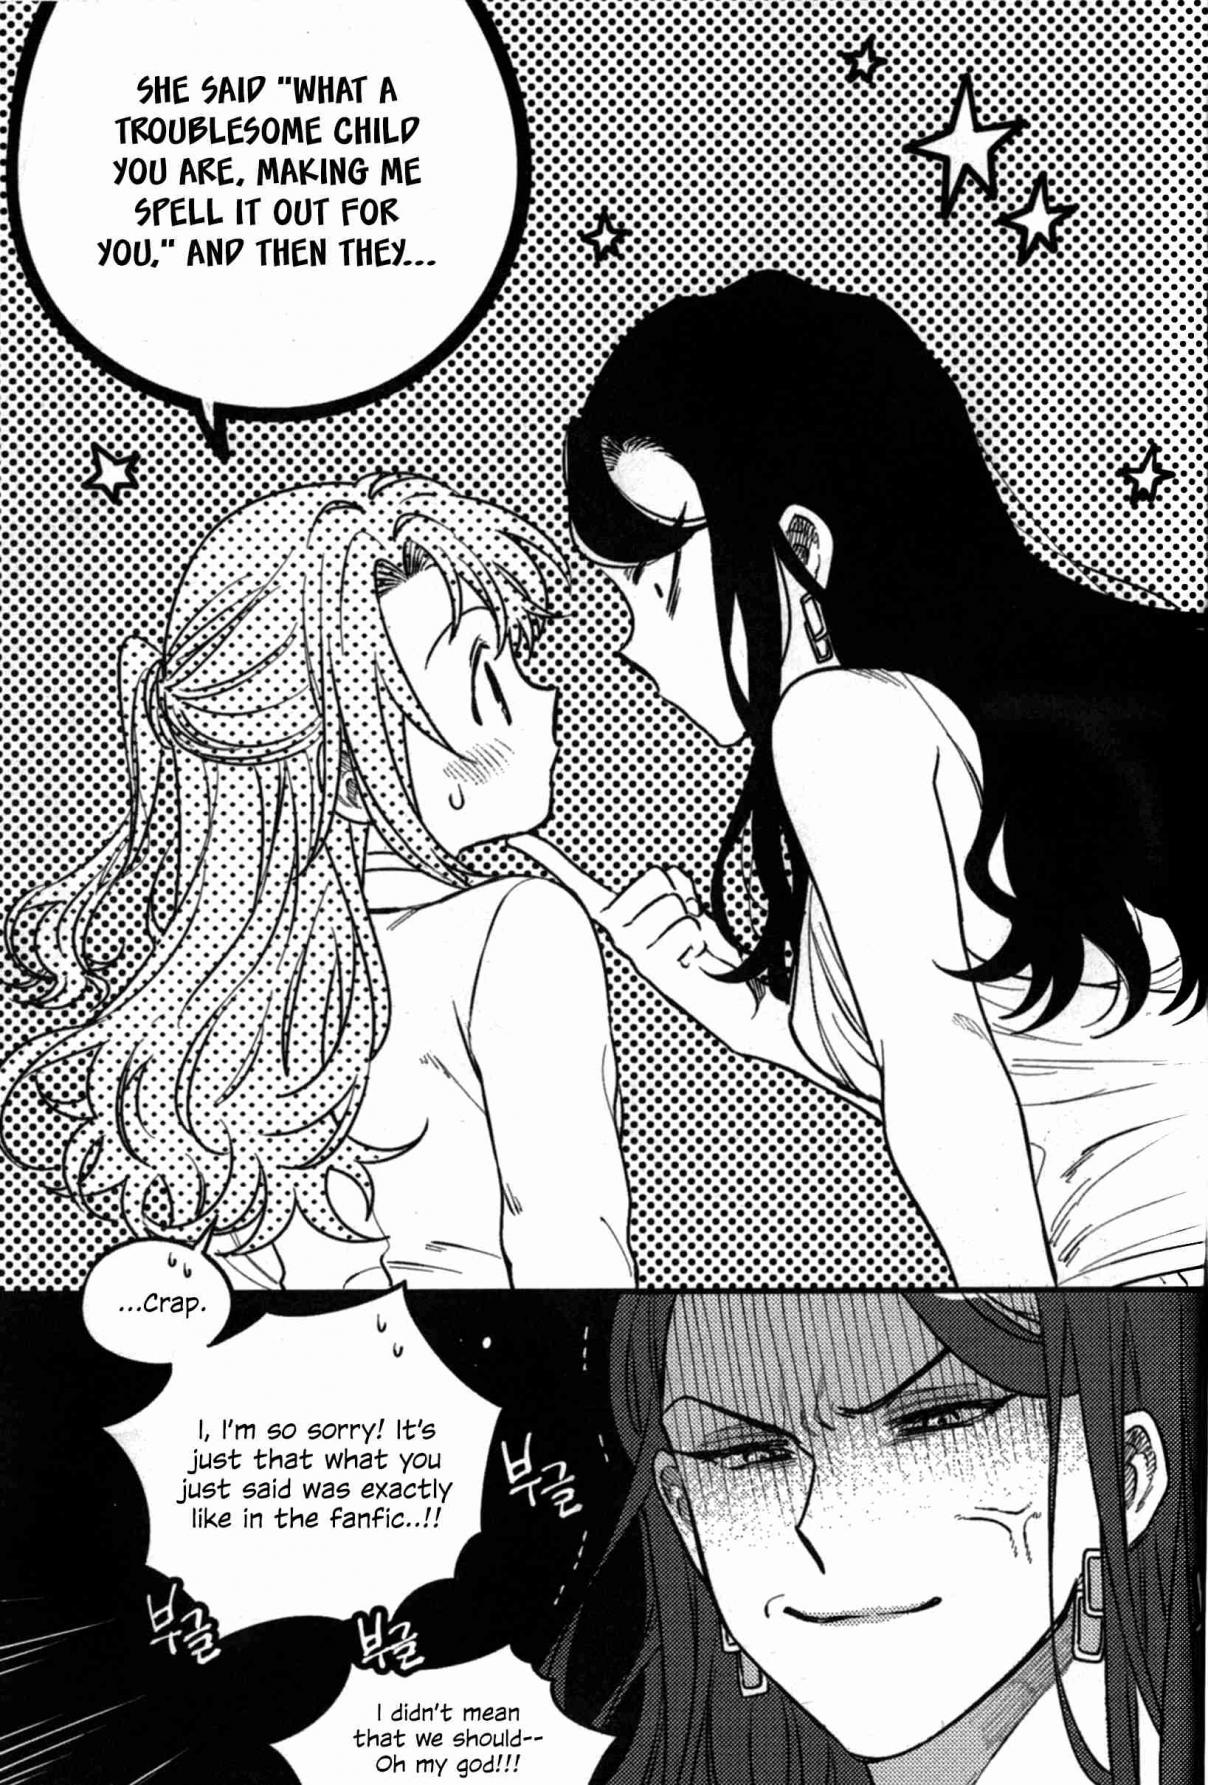 THE iDOLM@STER Am I Just a Sugar Baby to You, Director?! (Doujinshi) Oneshot